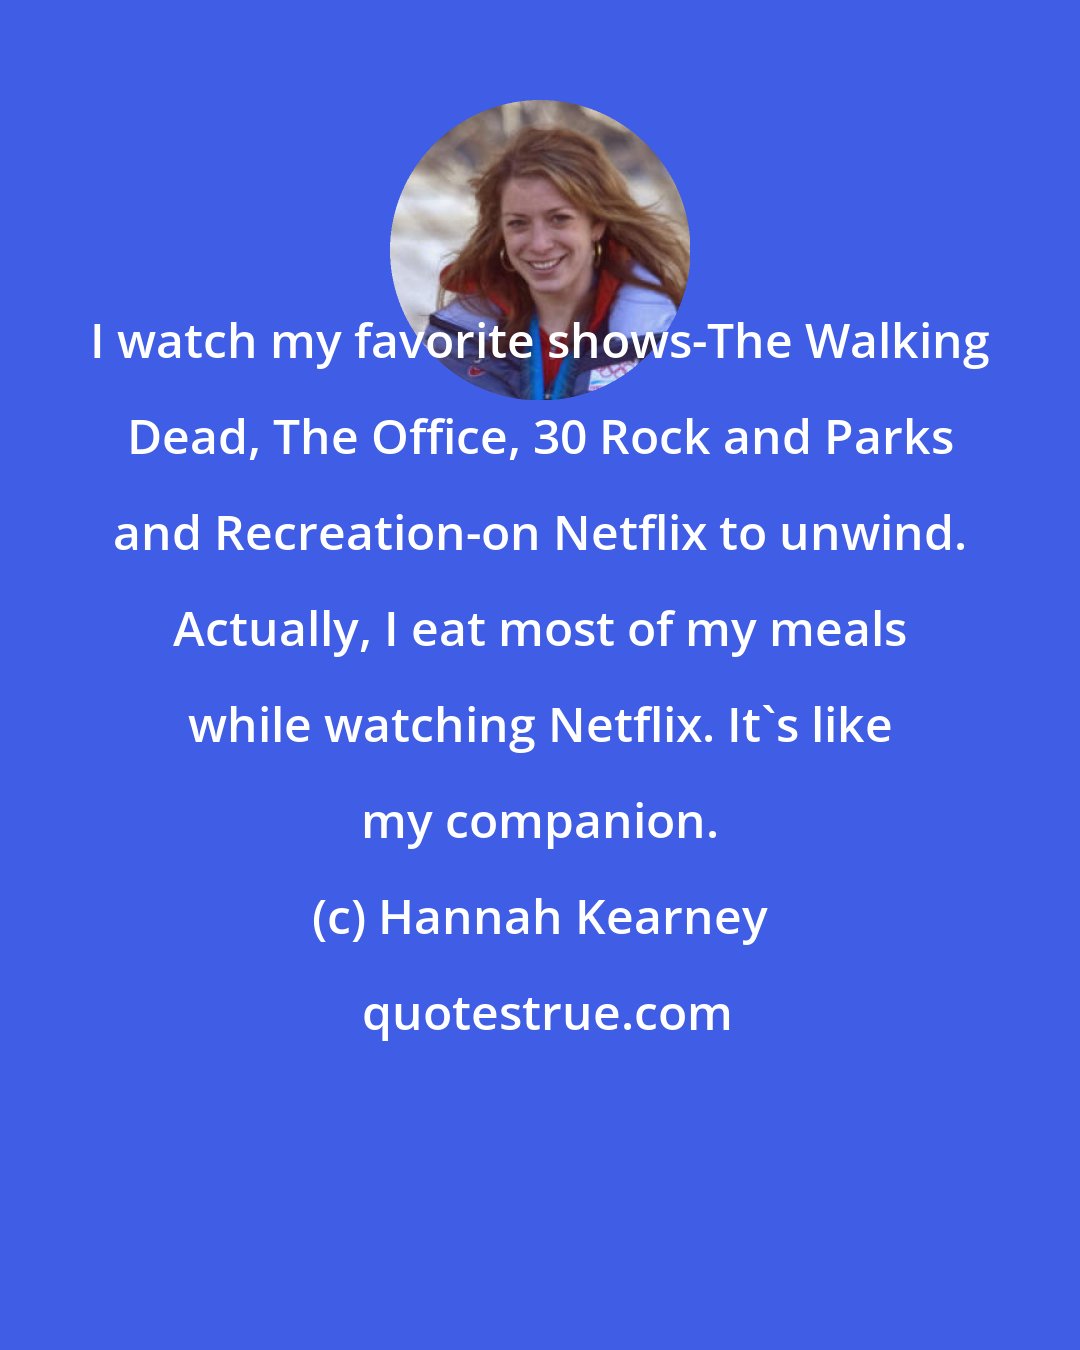 Hannah Kearney: I watch my favorite shows-The Walking Dead, The Office, 30 Rock and Parks and Recreation-on Netflix to unwind. Actually, I eat most of my meals while watching Netflix. It's like my companion.